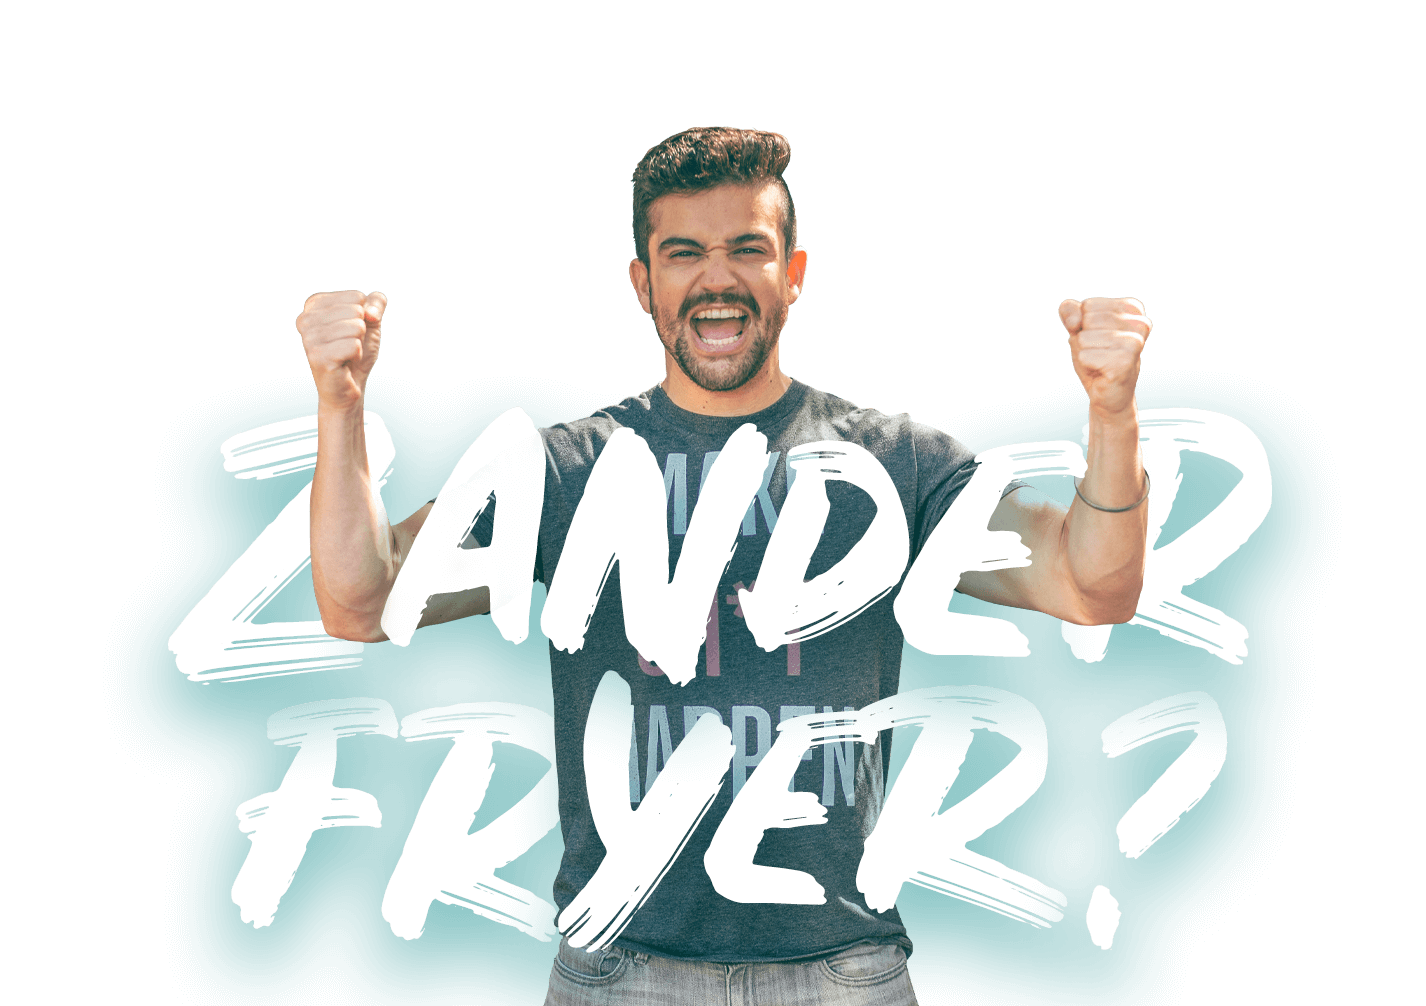 Zander Fryer Image with Text